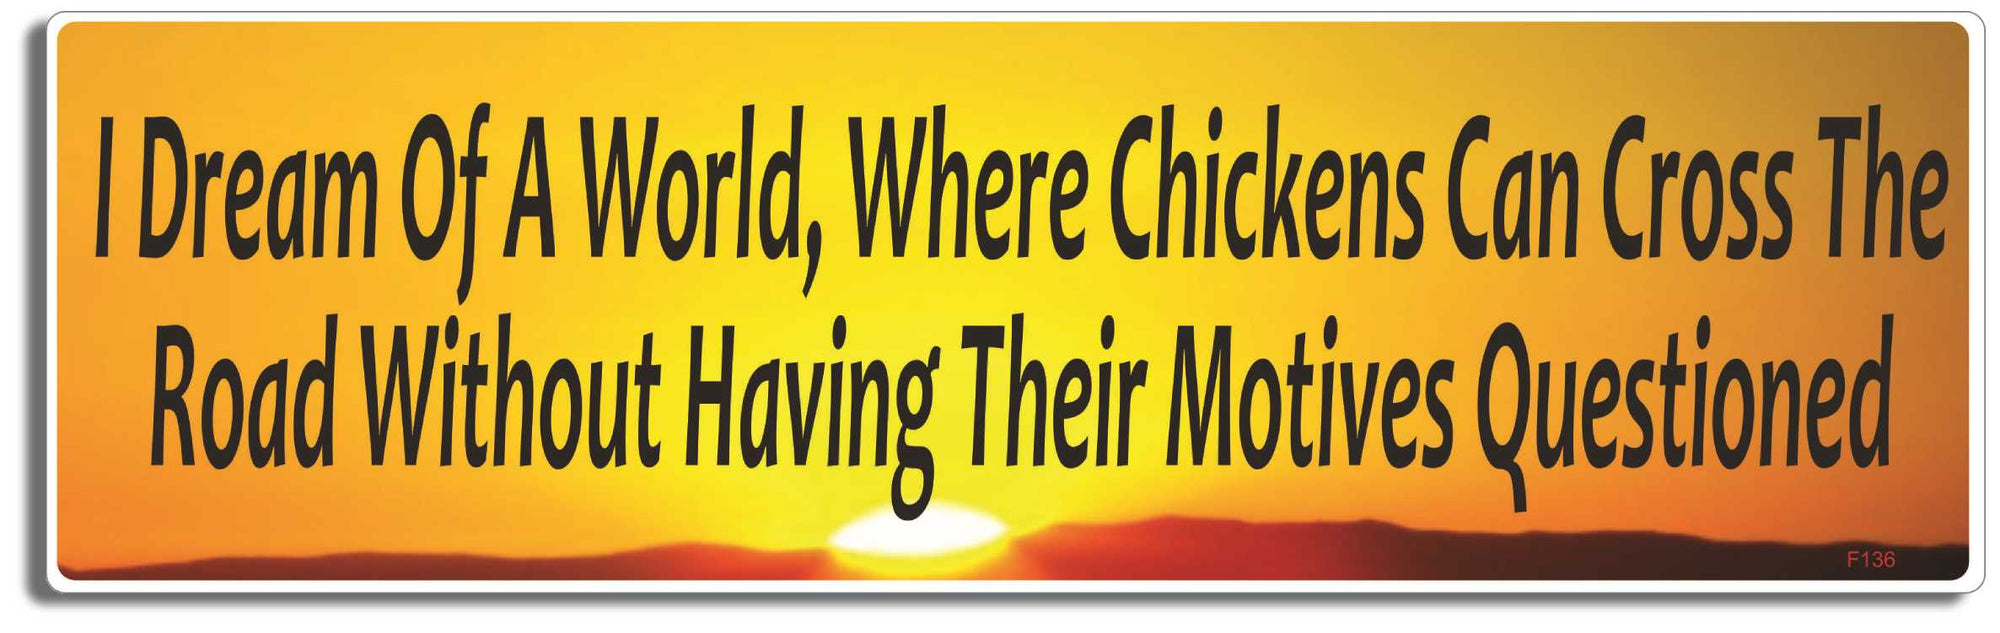 I dream of a world, where chickens can cross the road without having their motives questioned - 3" x 10" Bumper Sticker--Car Magnet- -  Decal Bumper Sticker-funny Bumper Sticker Car Magnet I dream of a world, where chickens-  Decal for cars funny, funny quote, funny saying